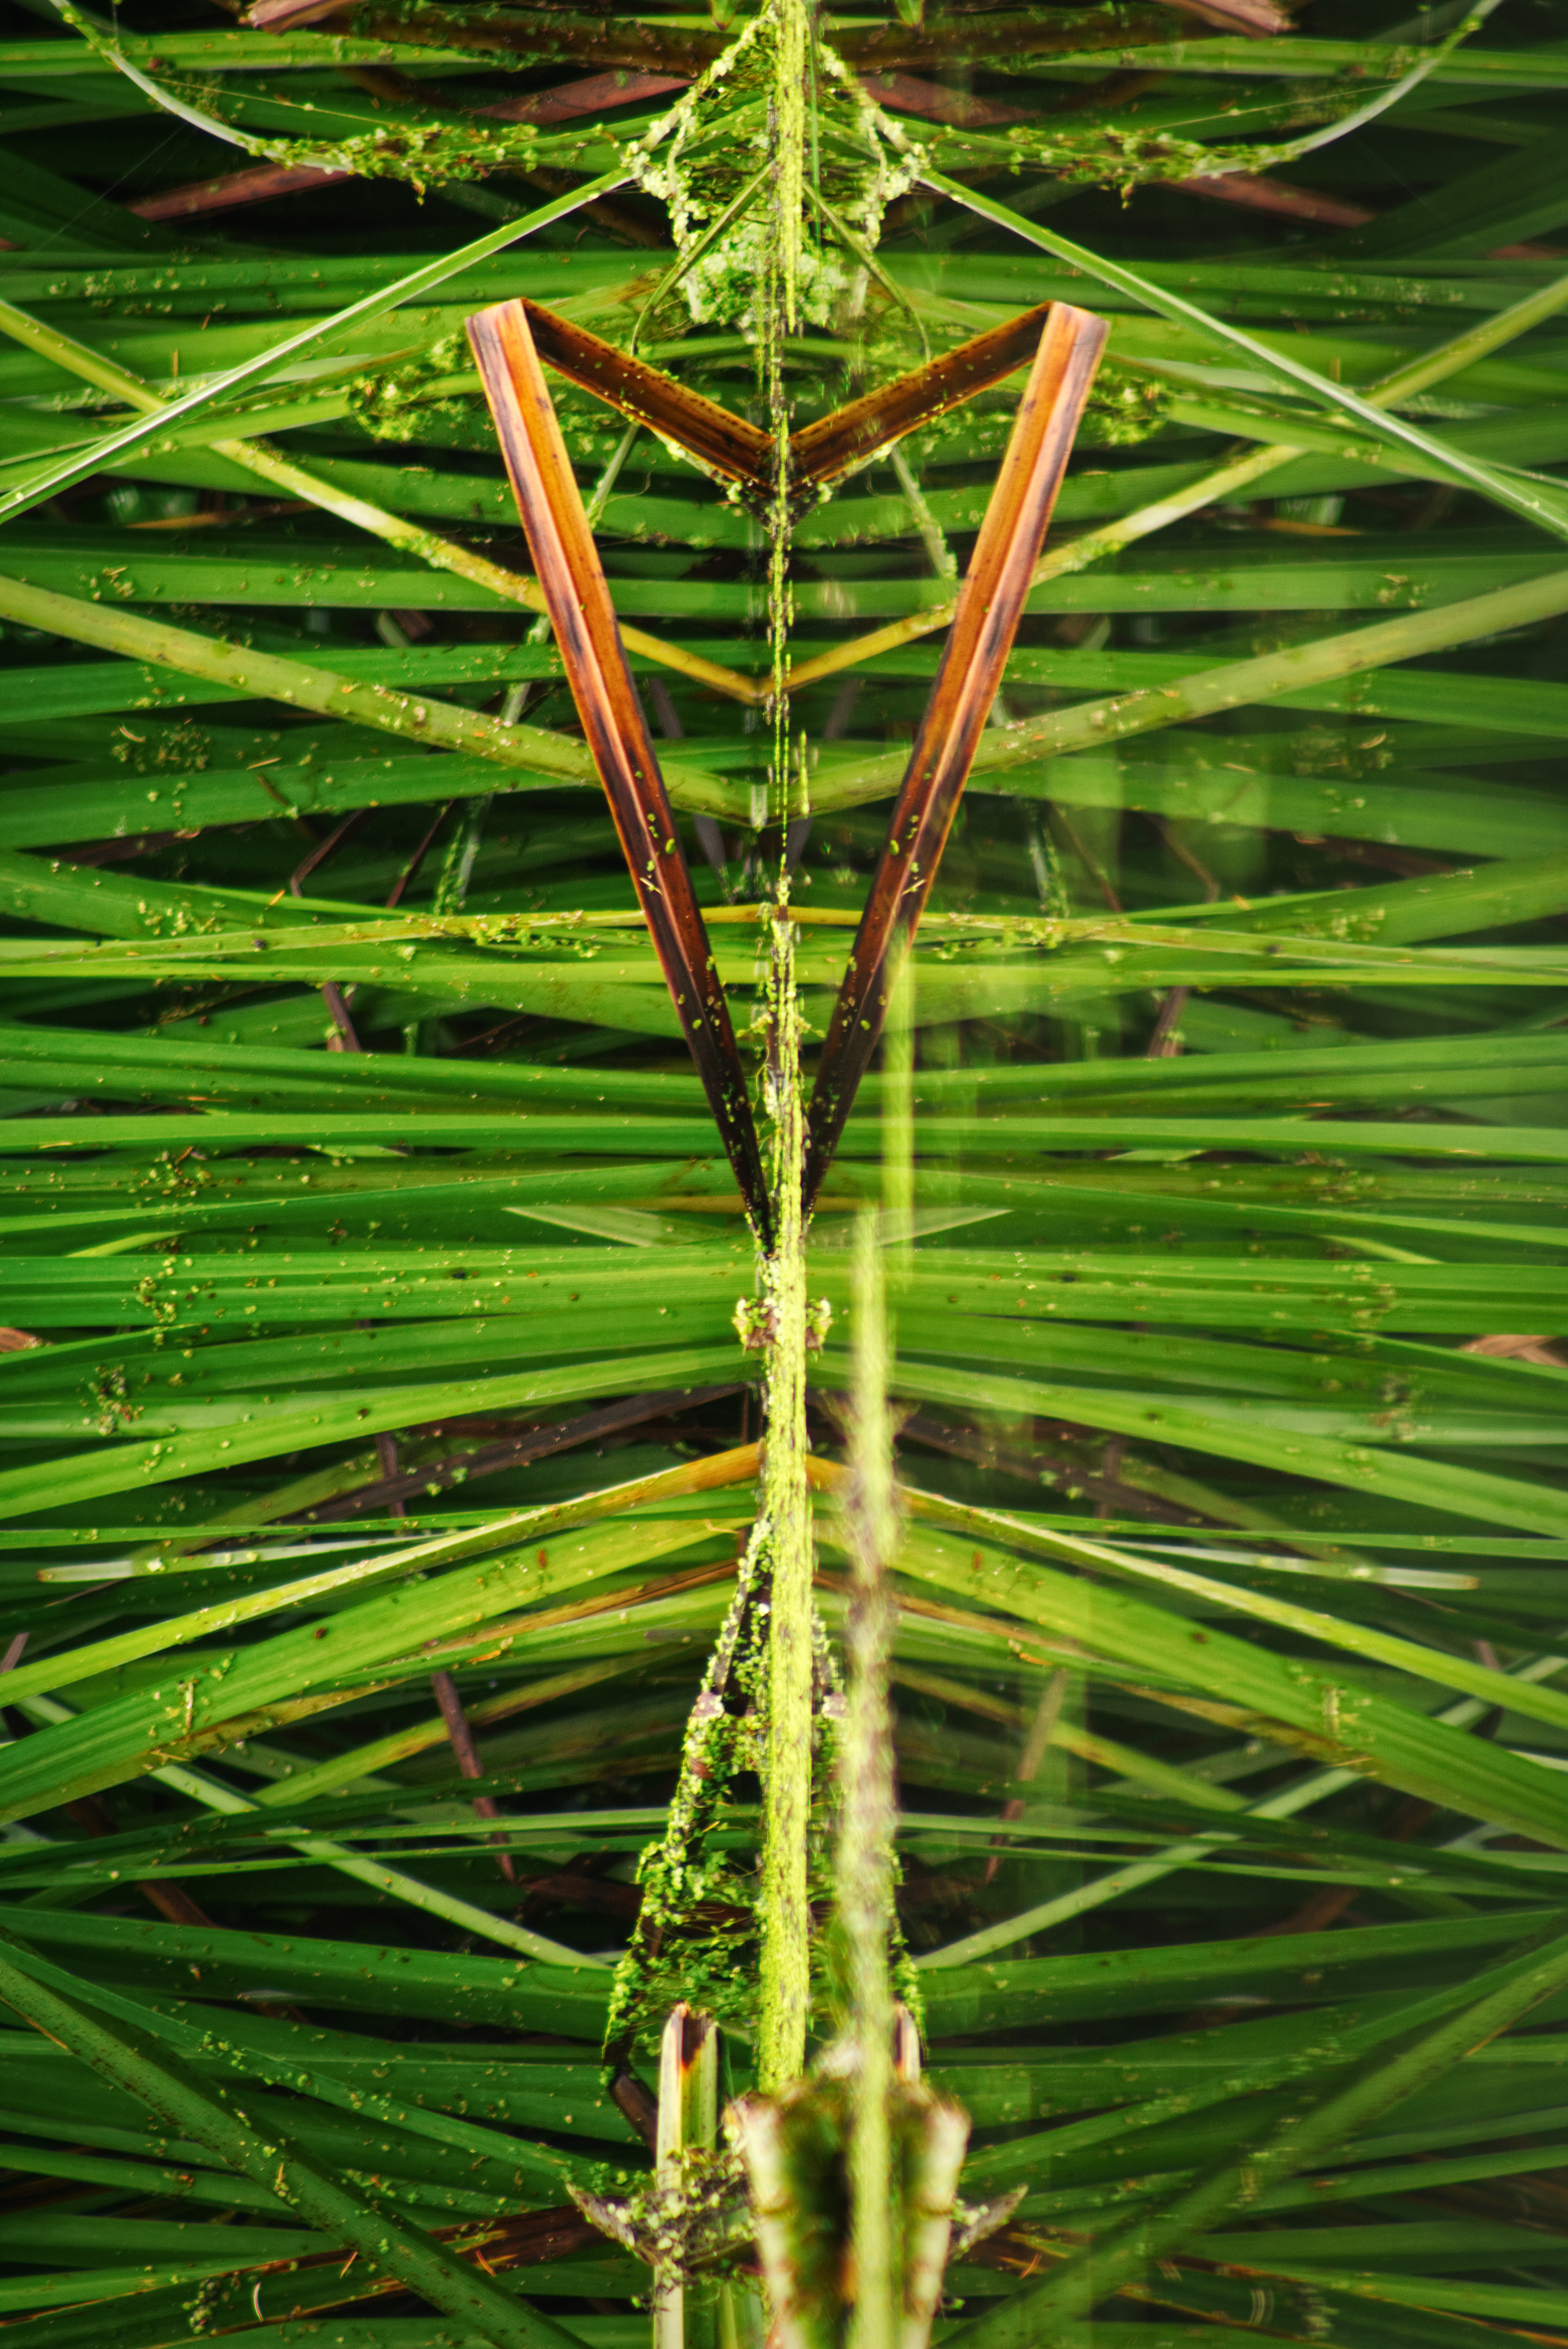 Reflection Rotated. The folded brown reed leaf created an appealing triangle, but flipped into portrait takes on an almost alien quality.